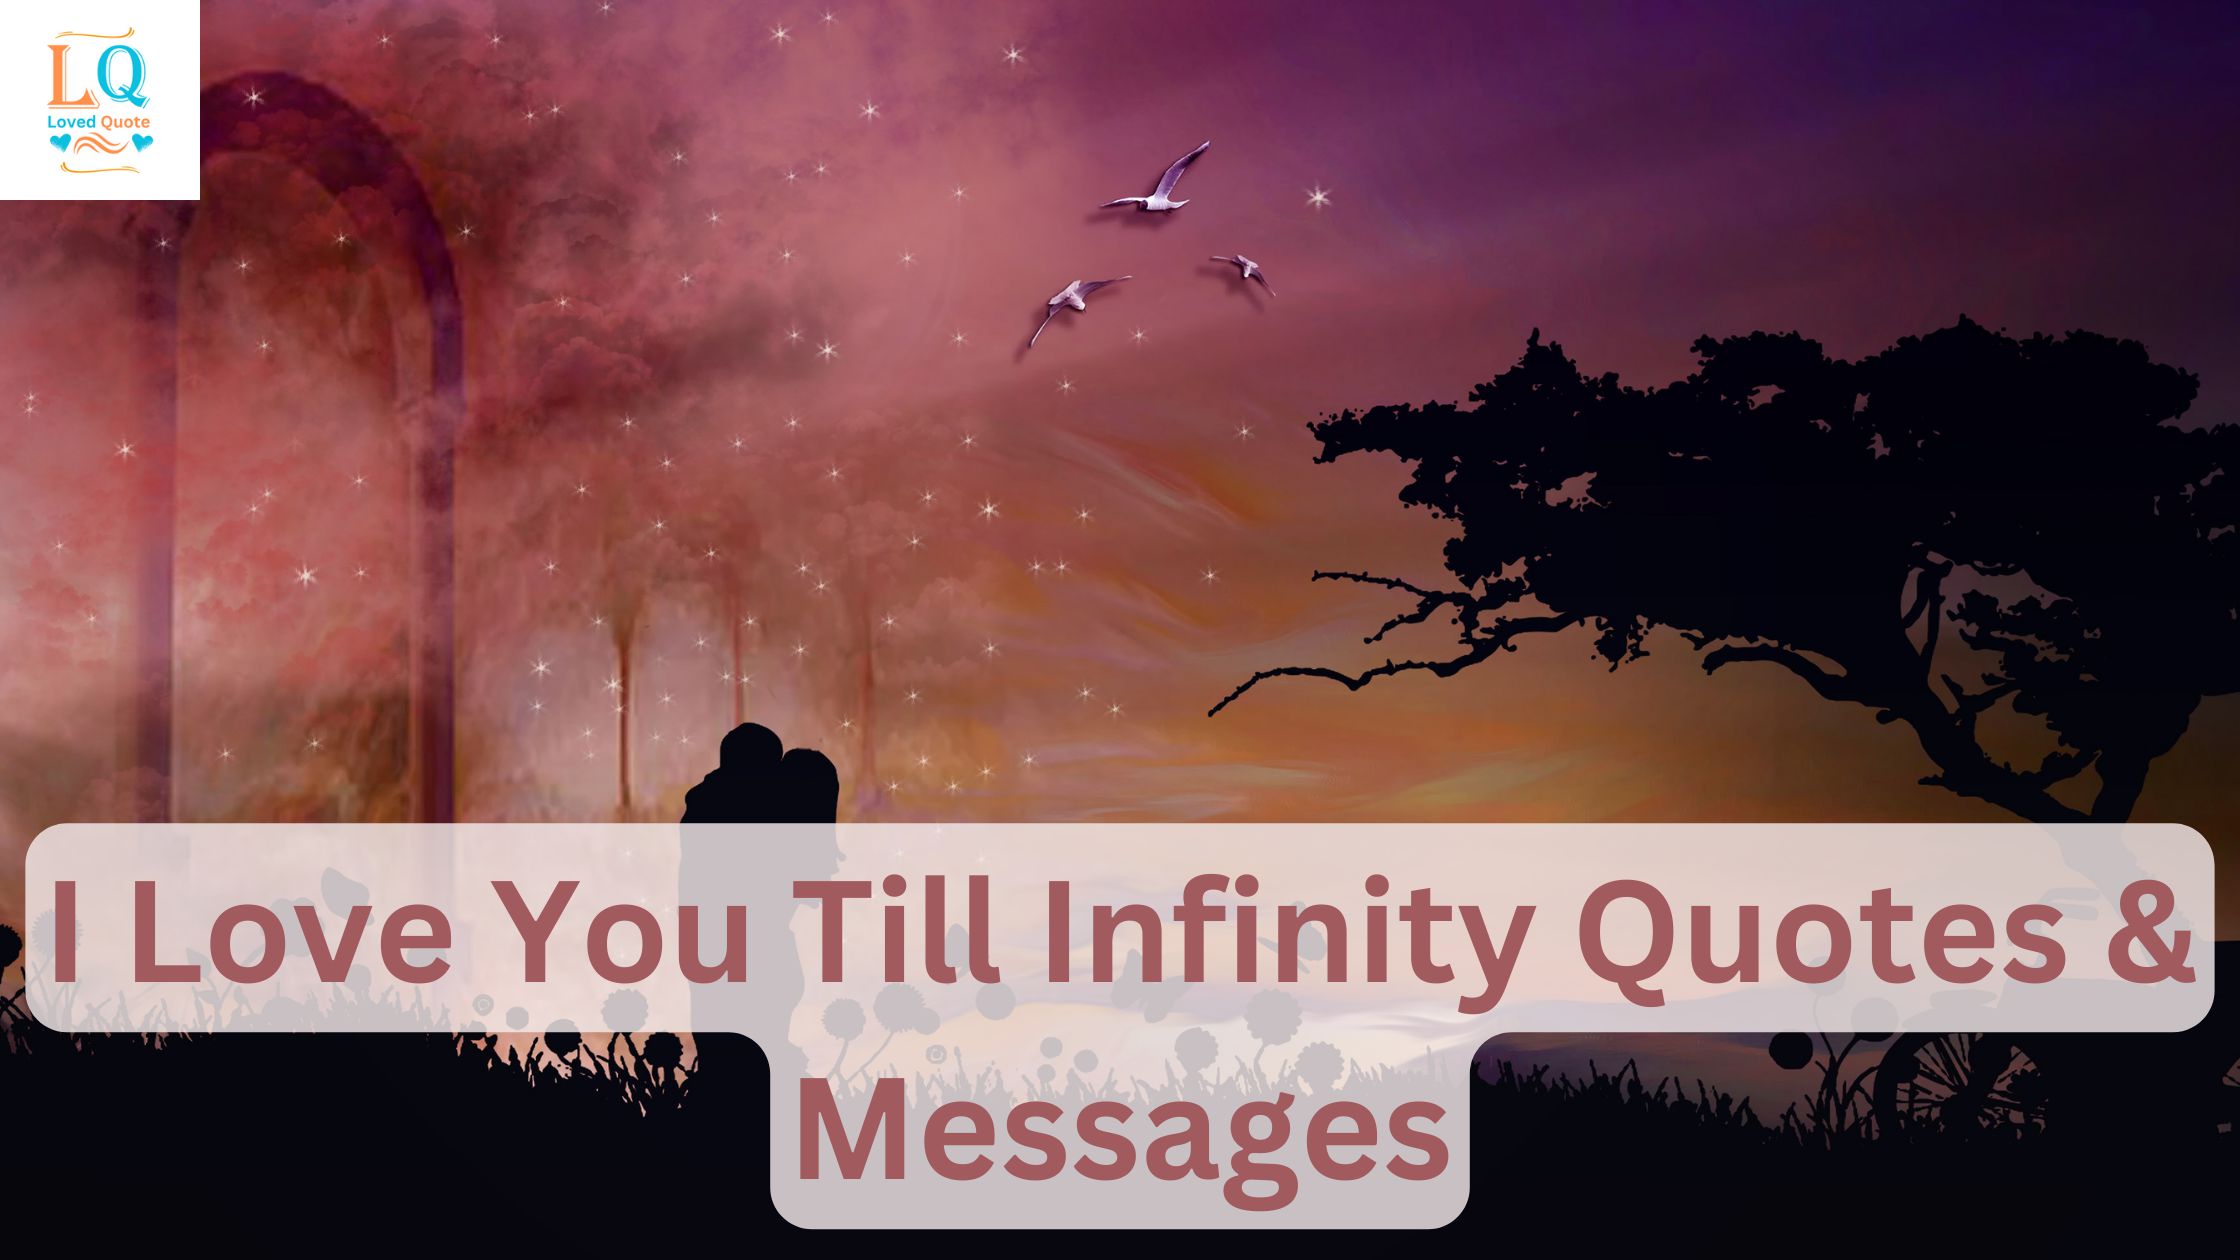 I Love You Till Infinity Quotes & Messages